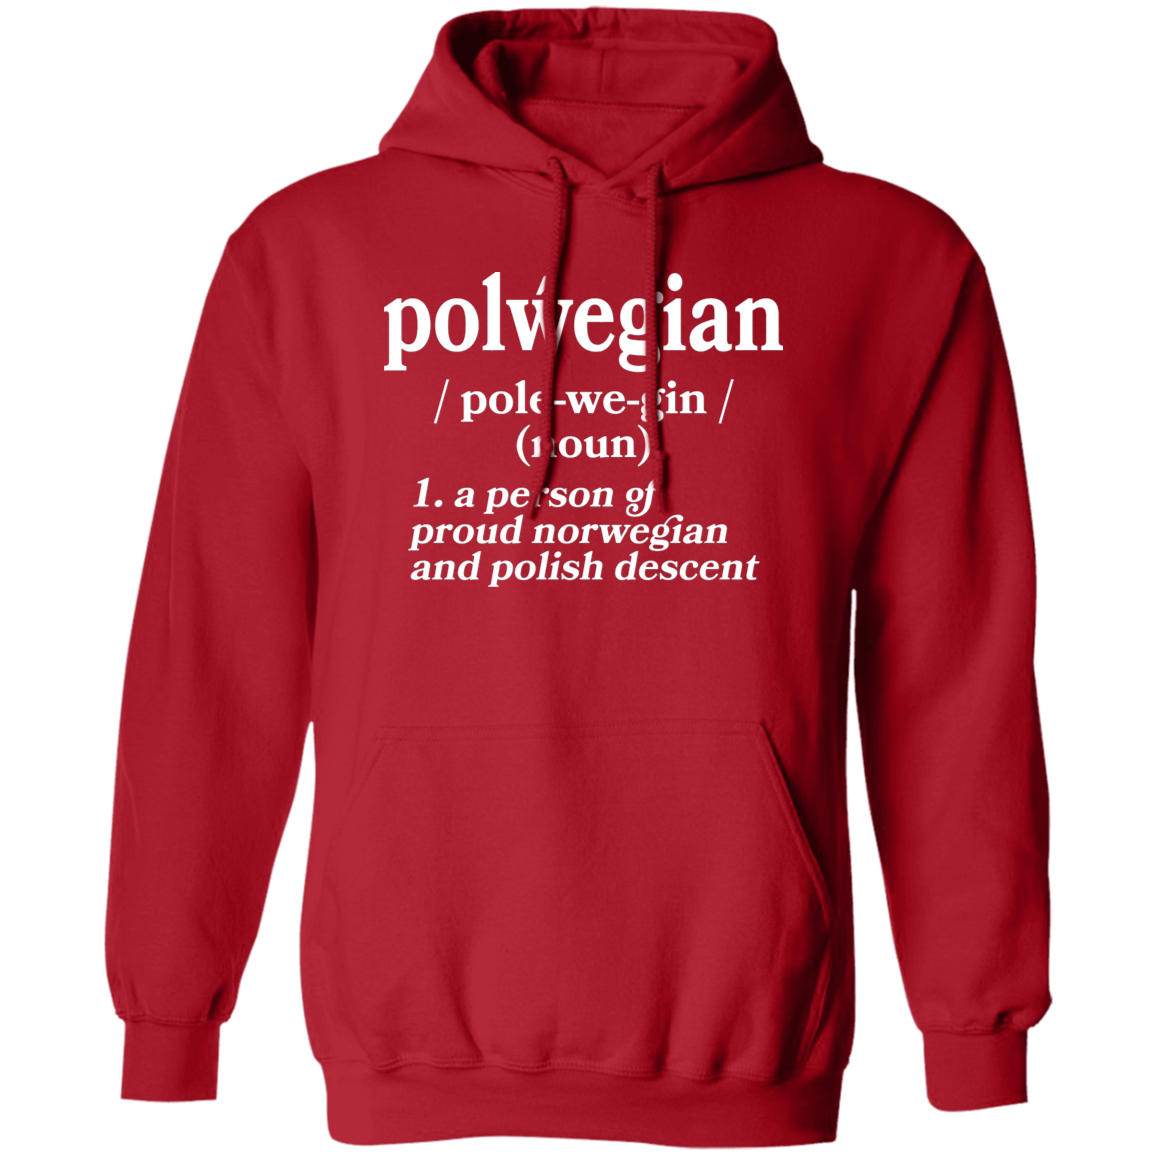 Polwegian - Norwegian and Polish Descent Apparel CustomCat G185 Pullover Hoodie Red S